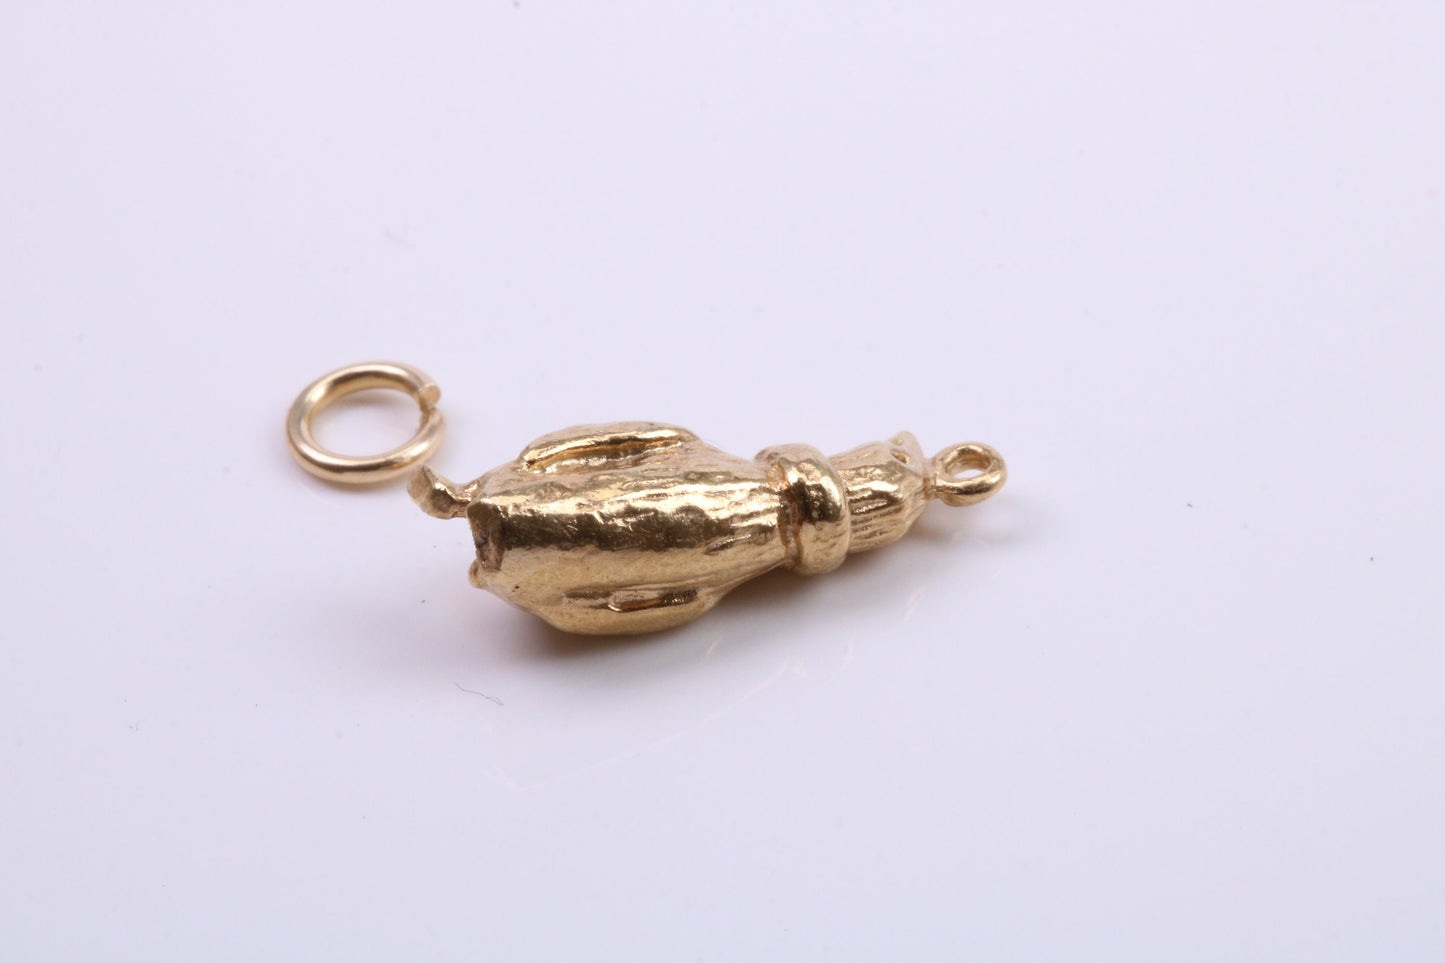 Penguin Charm, Traditional Charm, Made from Solid 9ct Yellow Gold, British Hallmarked, Complete with Attachment Link